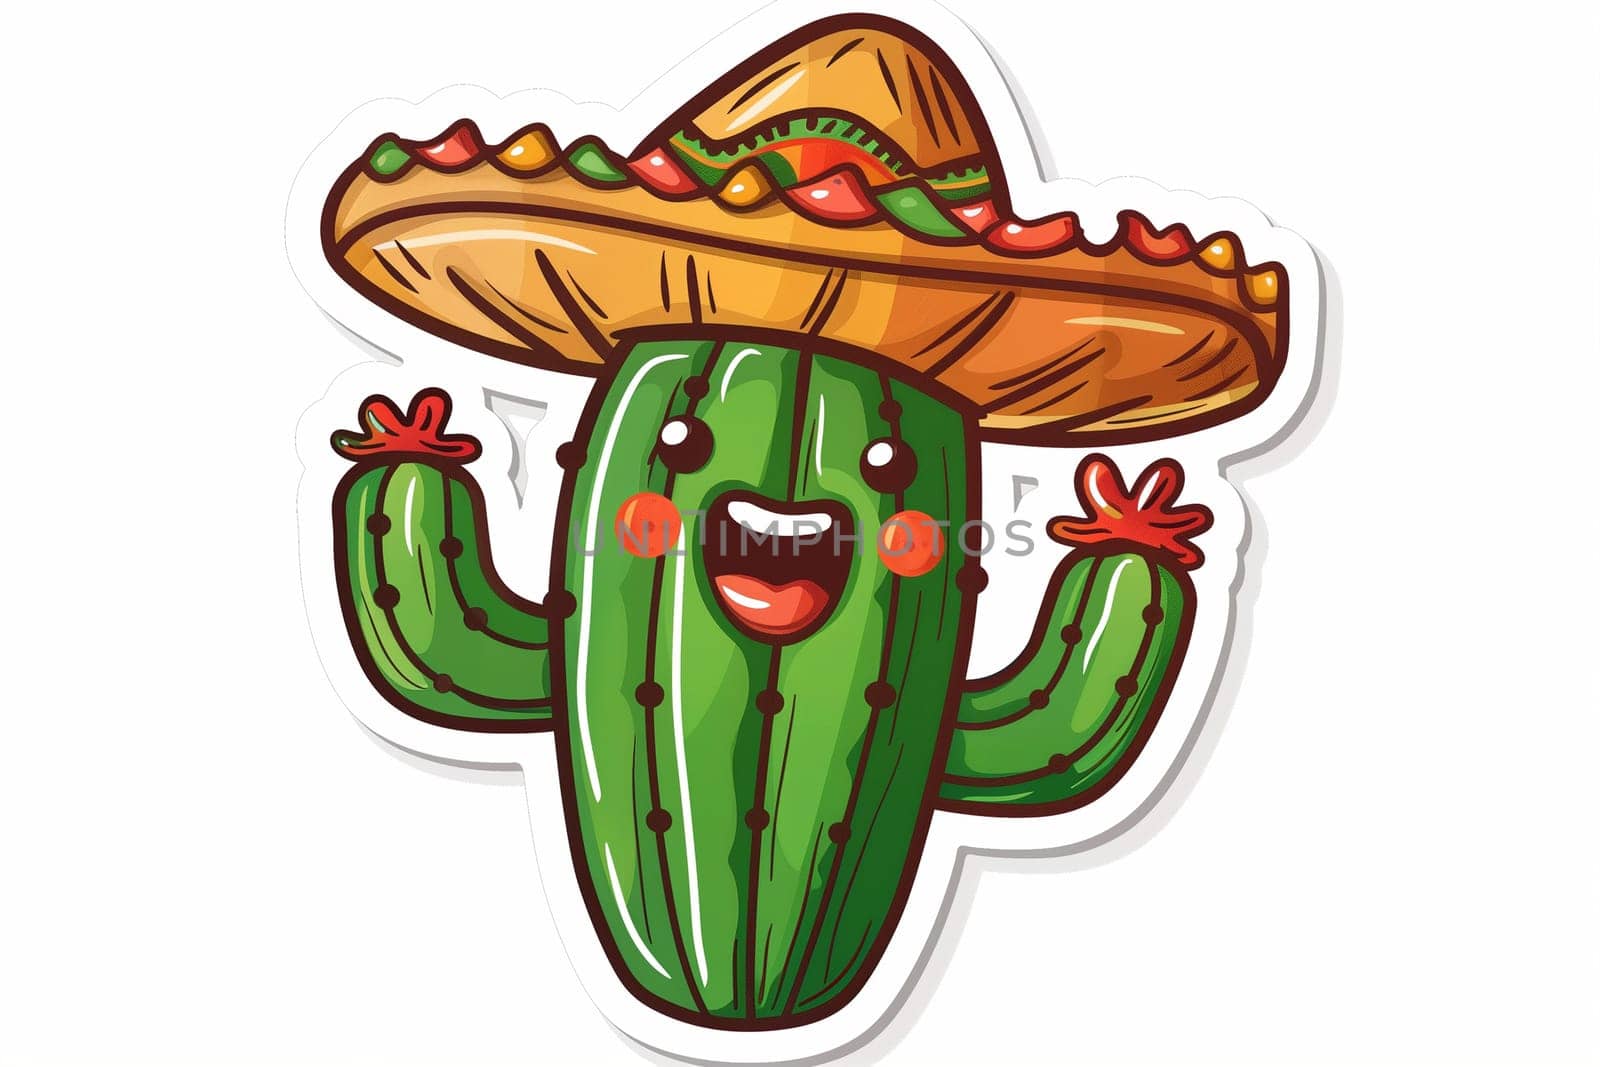 A green cactus with a sombrero placed on its head, showcasing a festive and cultural celebration of Cinco de Mayo.